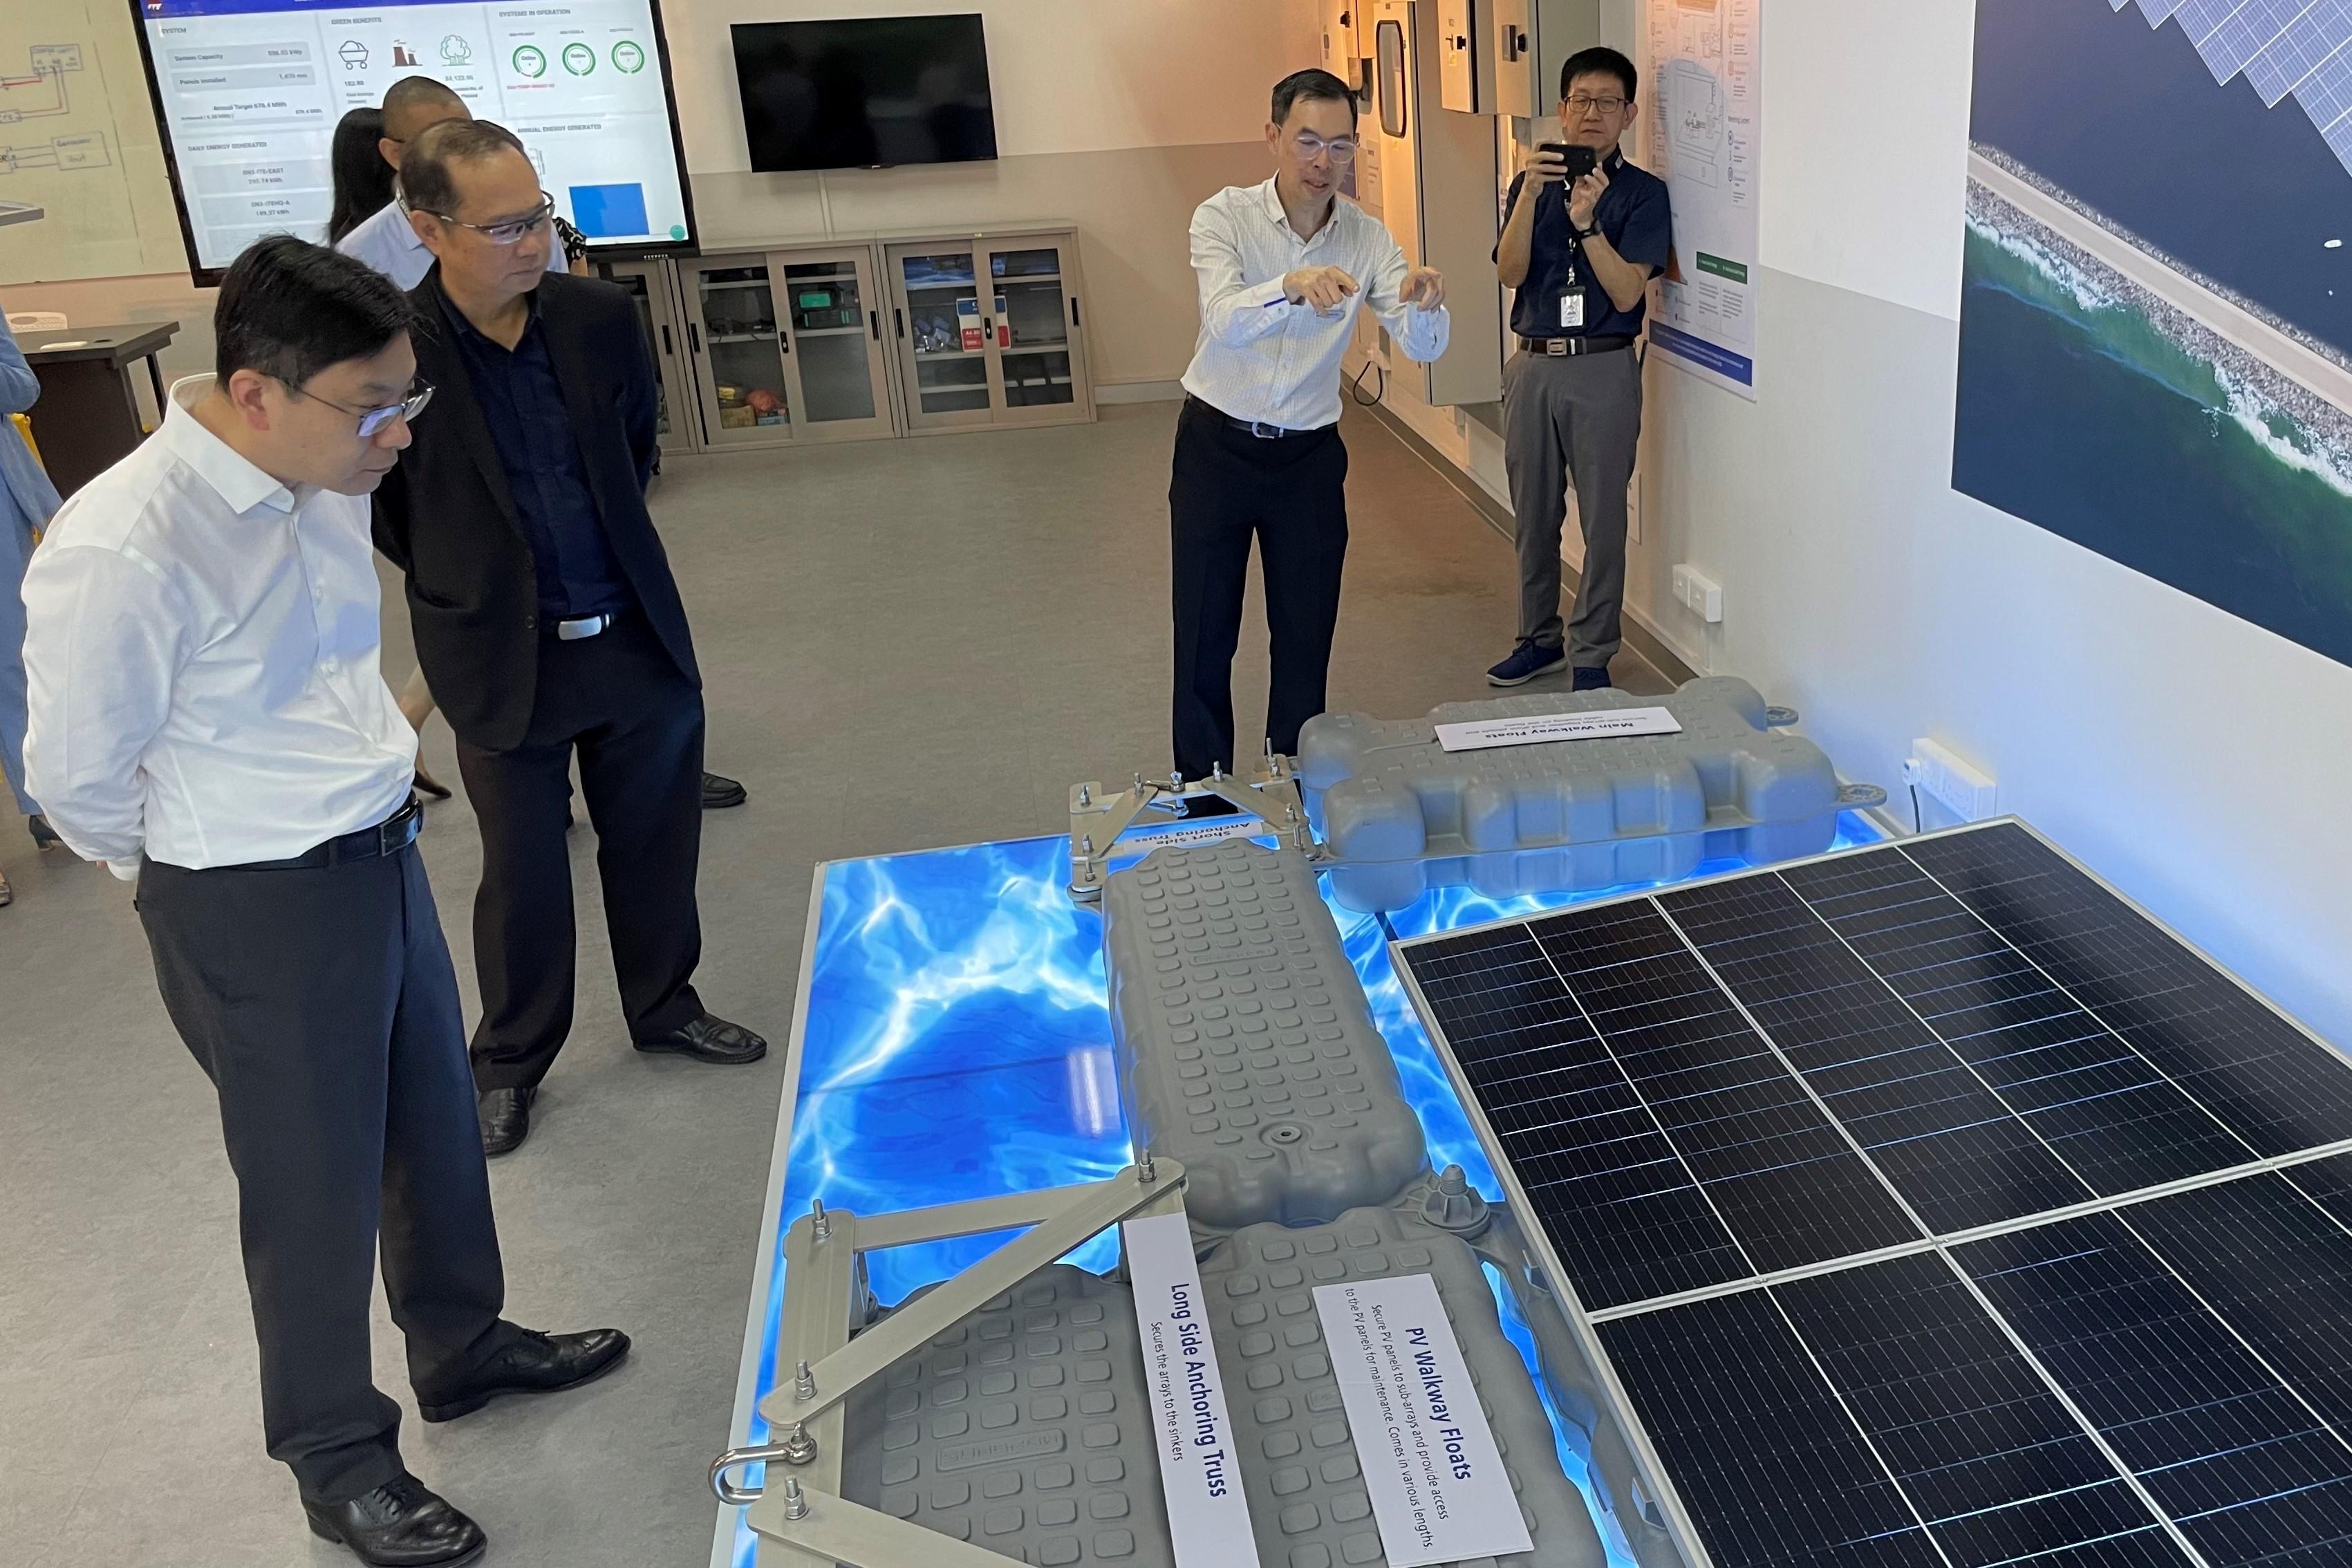 The Secretary for Labour and Welfare, Mr Chris Sun, visited the Institute of Technical Education yesterday afternoon (January 6) during his visit to Singapore to take a closer look at innovation and technology solutions for the sustainable development of human resources. Photo shows Mr Sun (first left) listening to an introduction on the operations of floating photovoltaic systems.